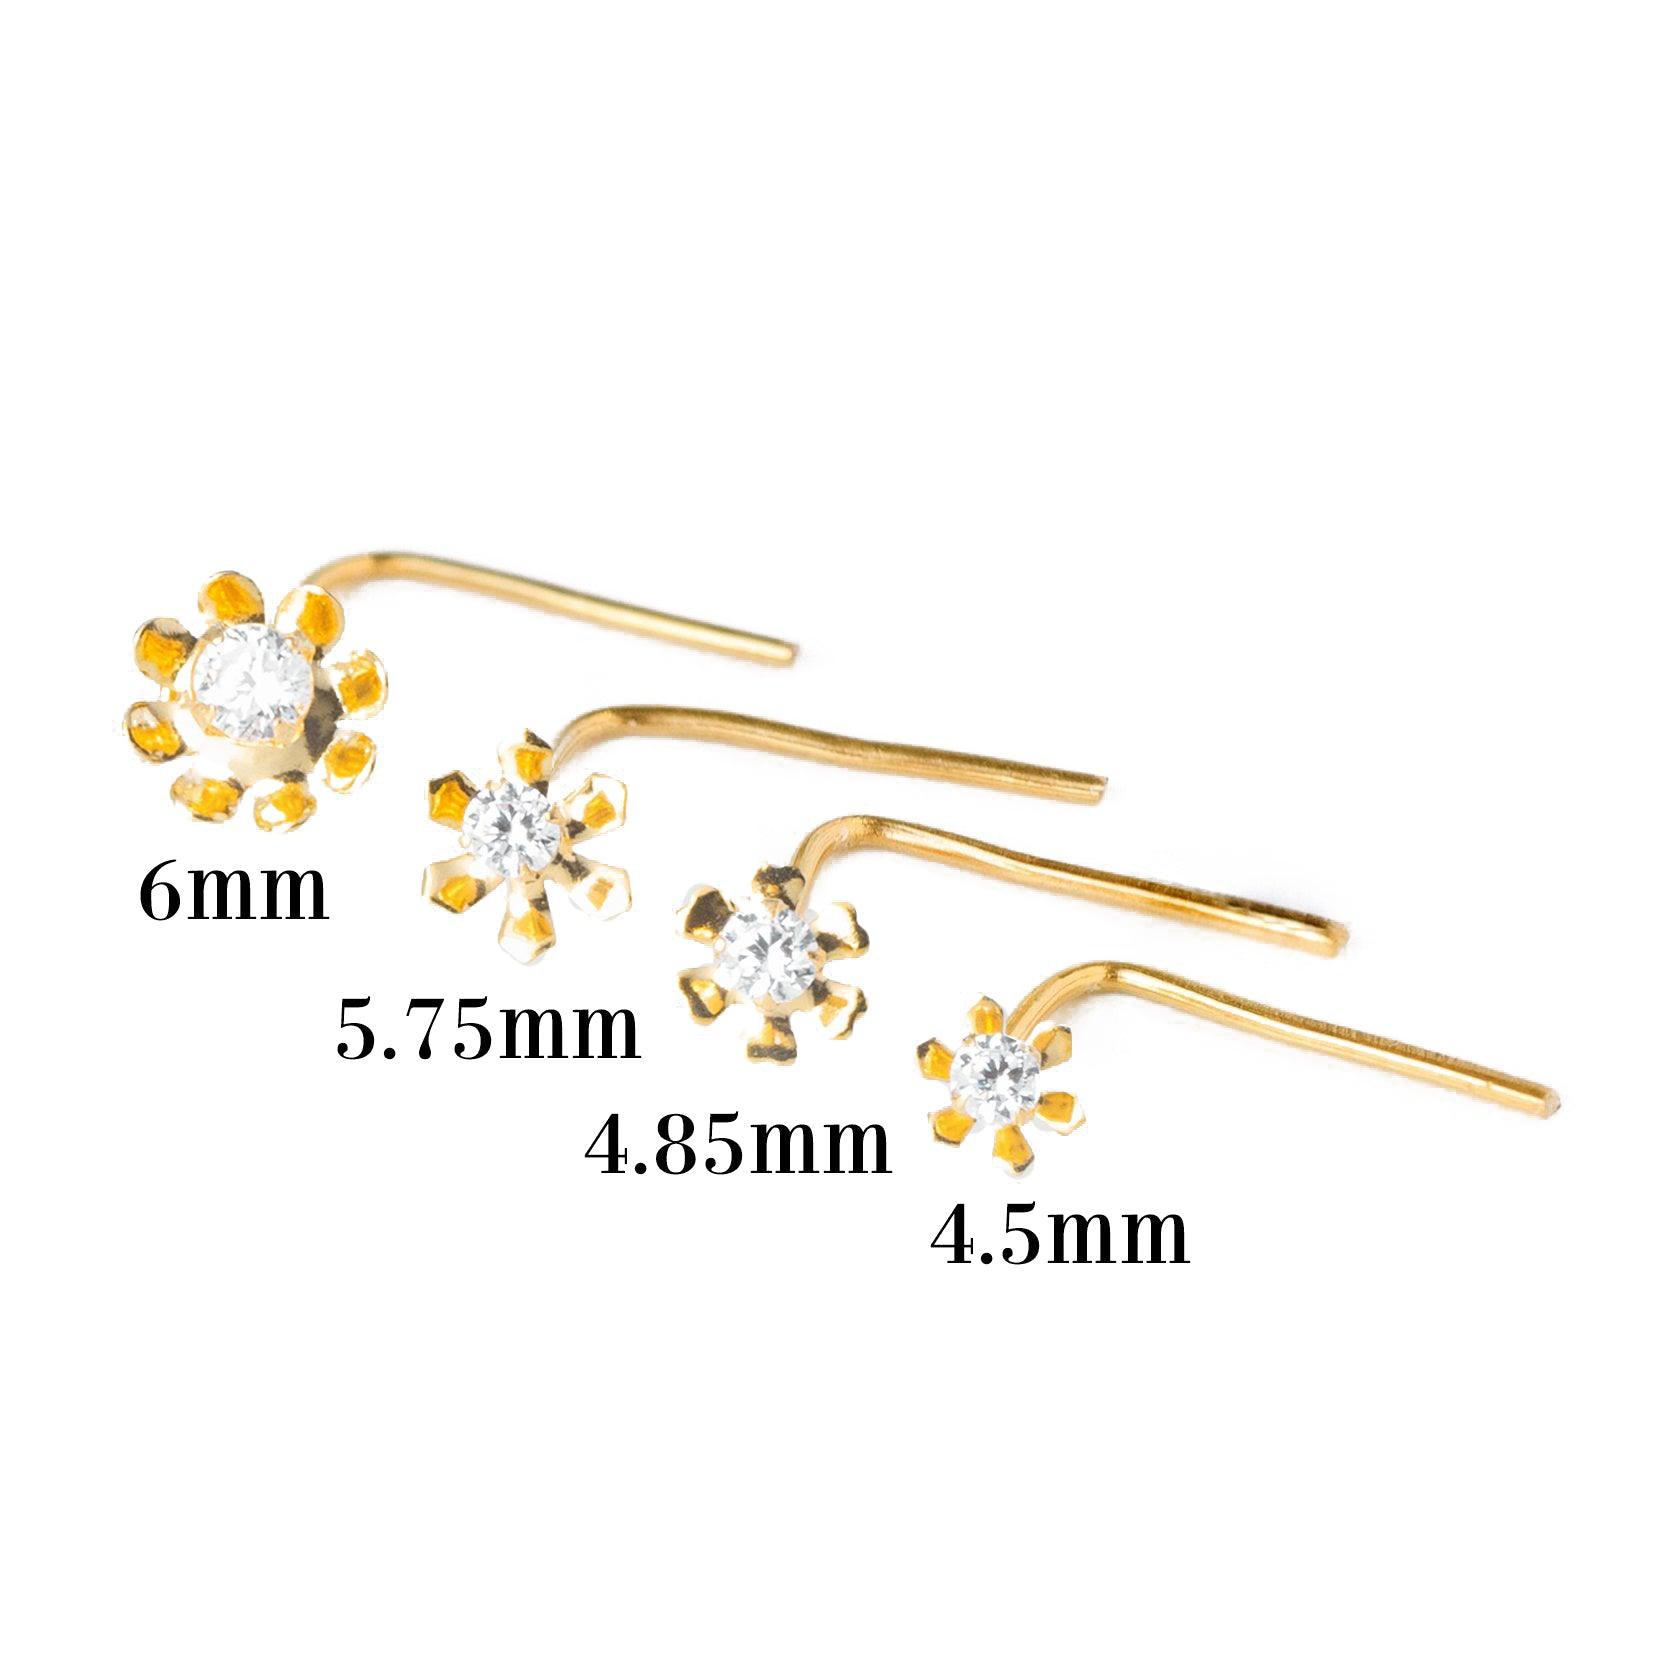 18ct Yellow Gold L Shape Back Nose Stud set with Cubic Zirconia in a Flower Design (4.5mm - 6mm) NIP-4-080 - Minar Jewellers